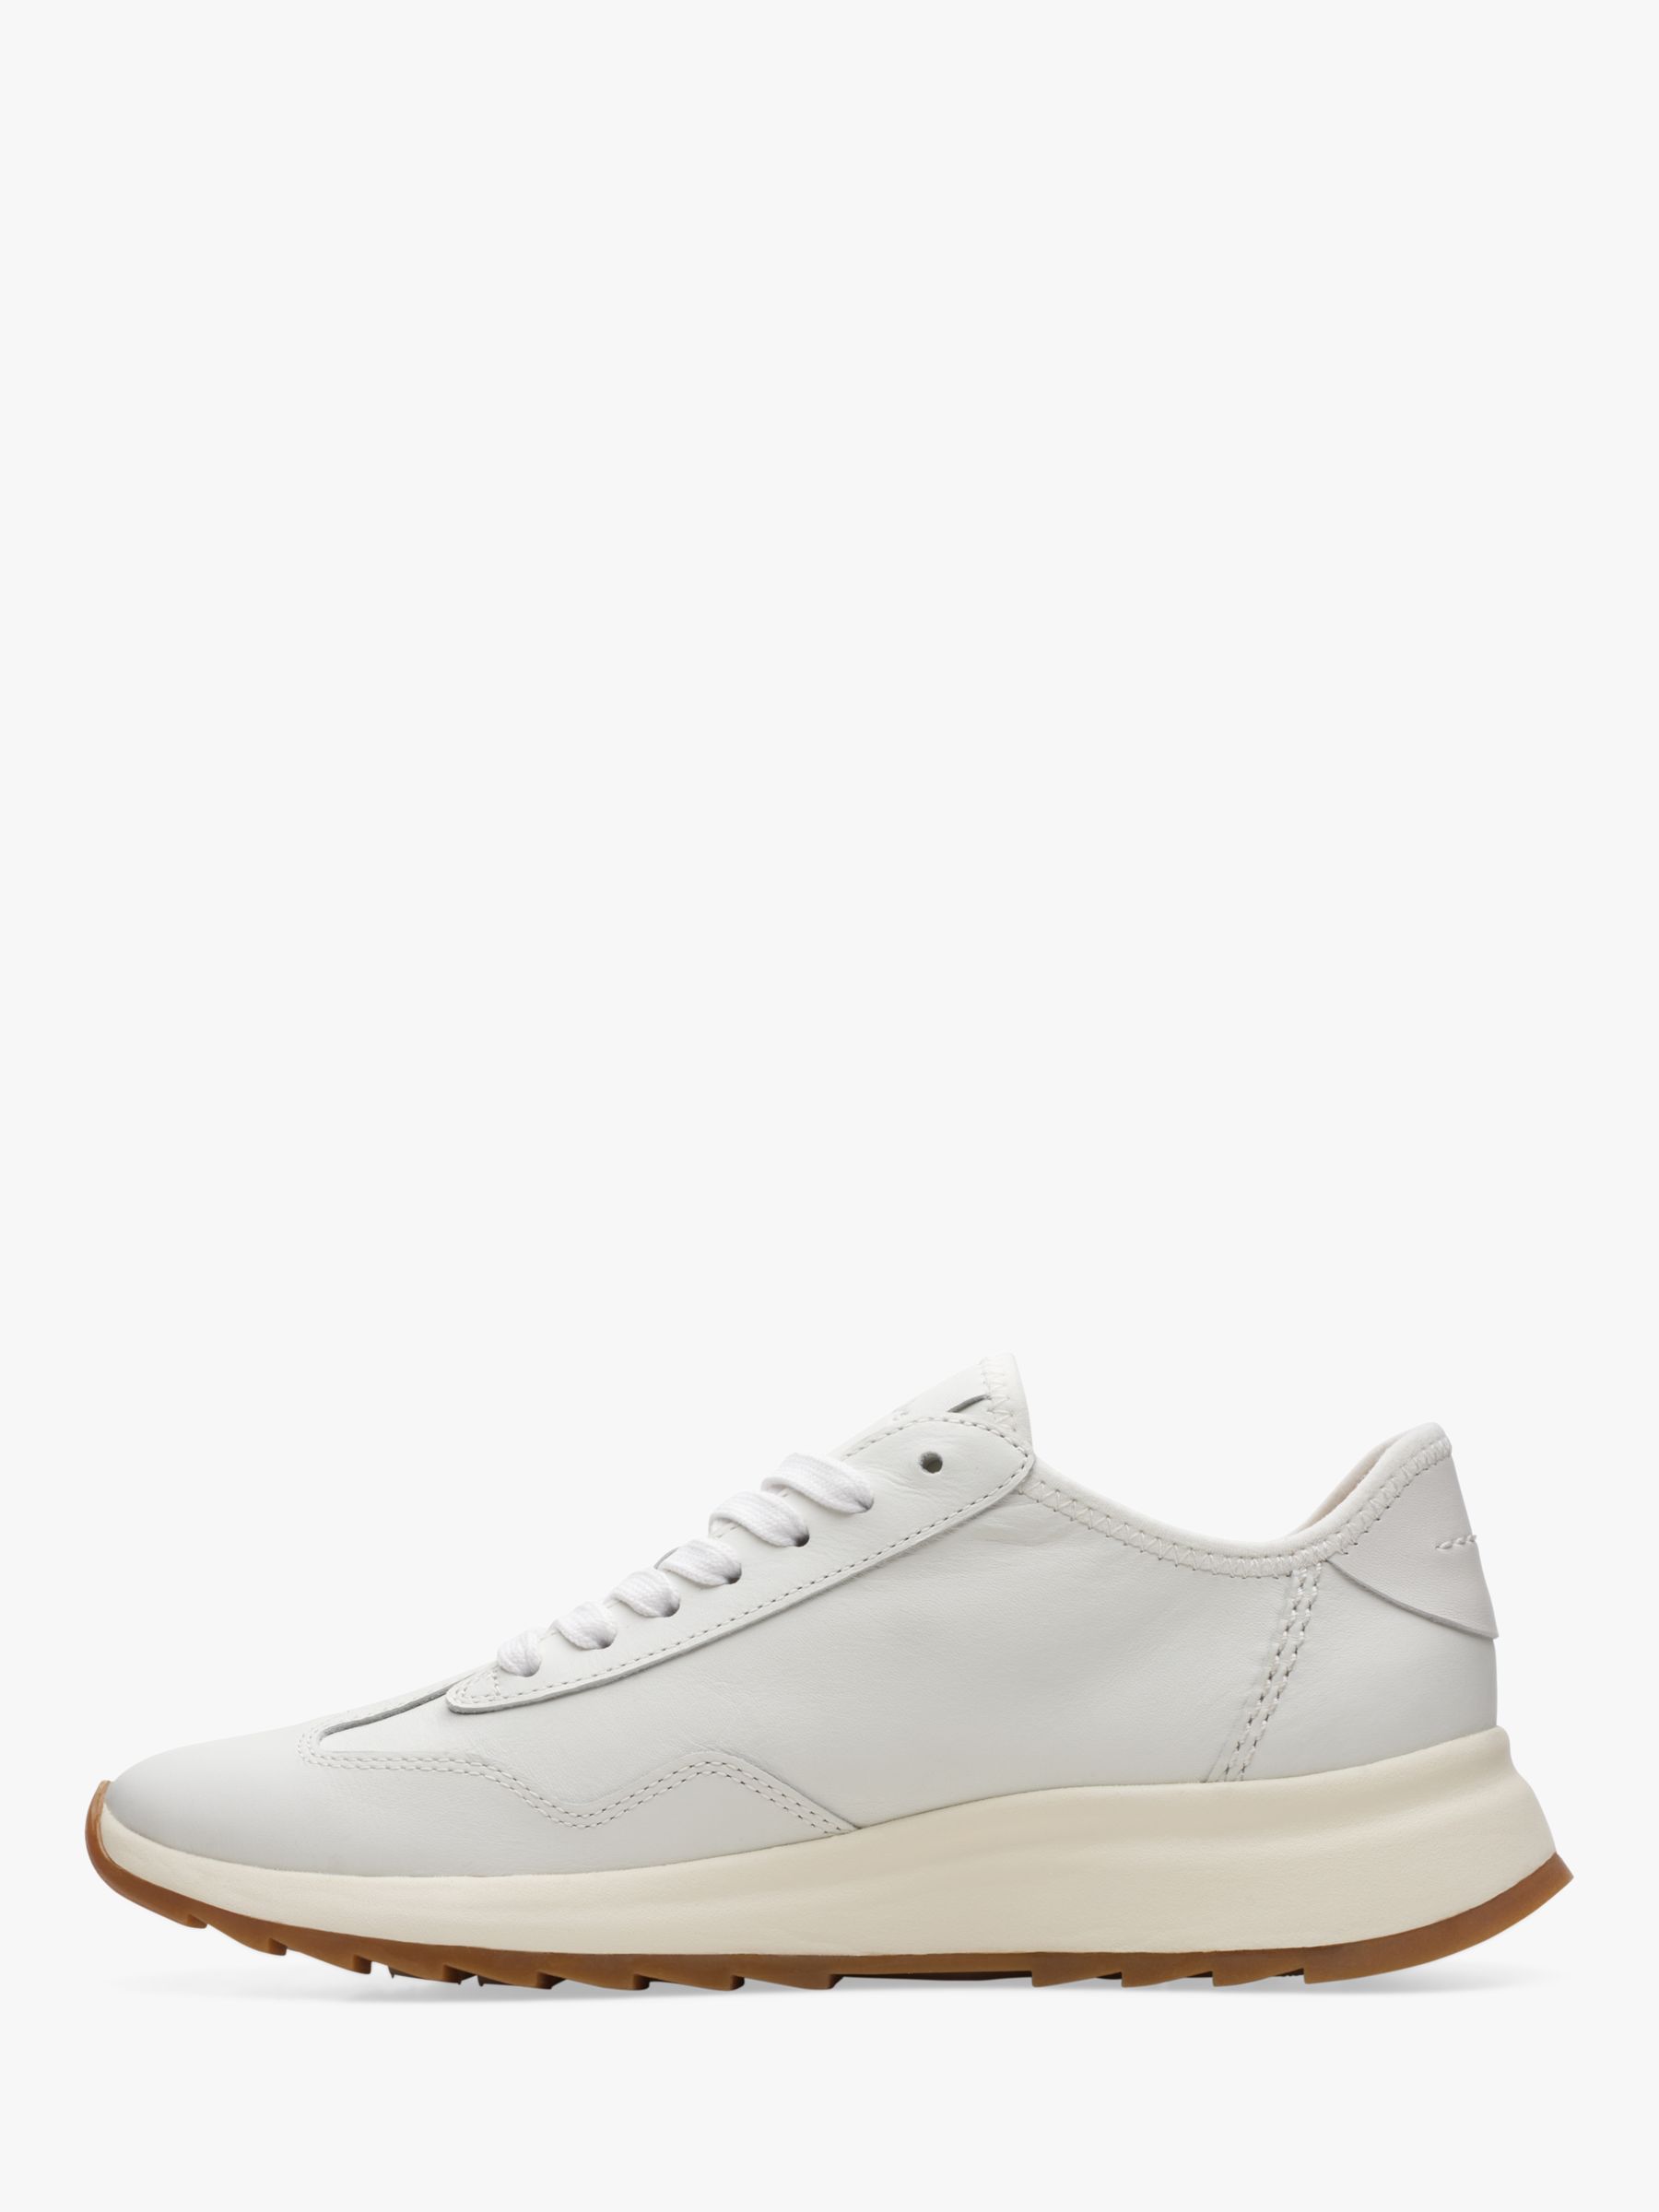 Clarks DashLite Lo Wide Fit Leather Trainers, White at John Lewis ...